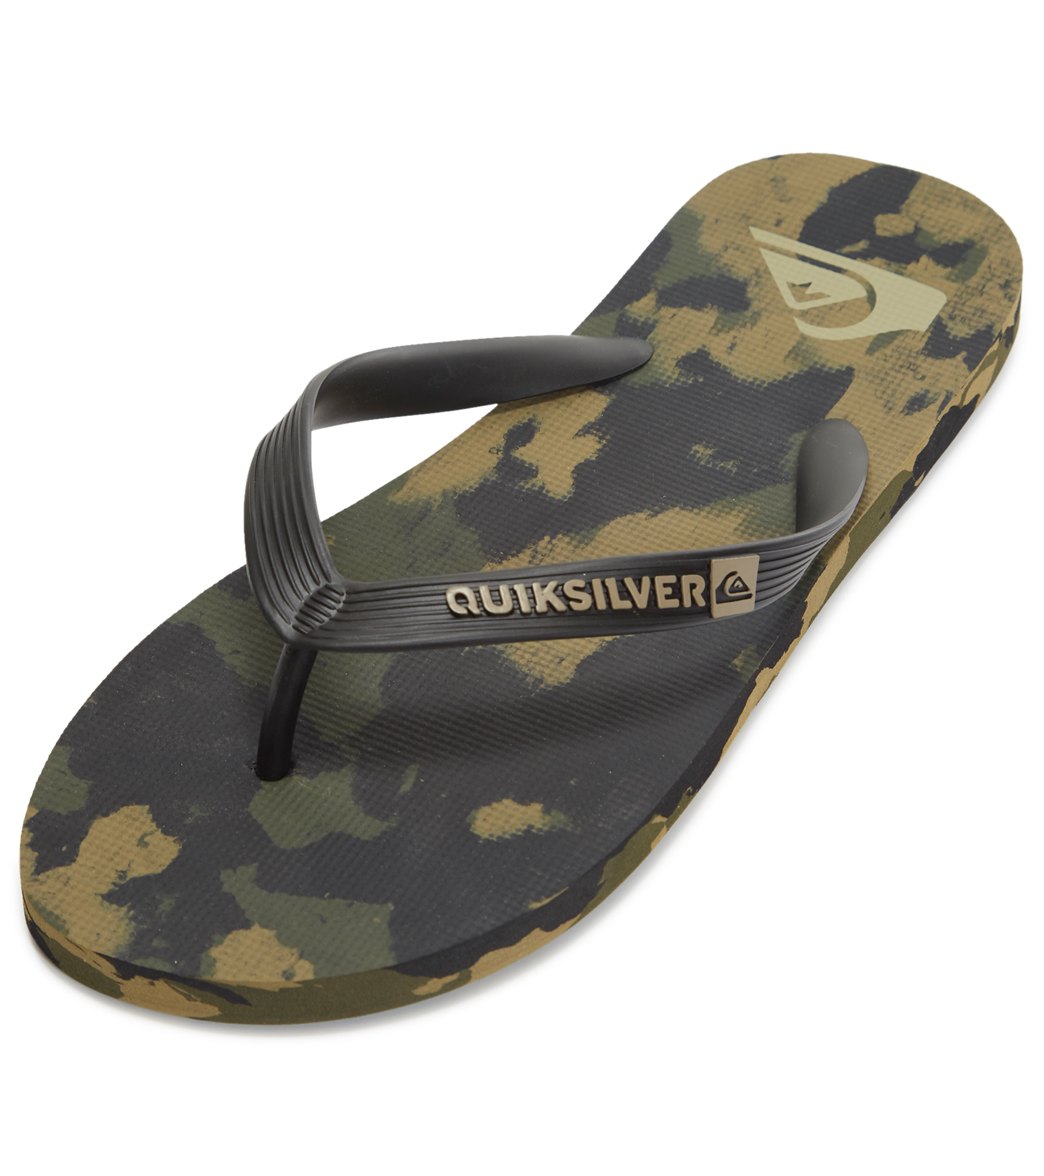 Quiksilver Molokai Marbled Flip Flop at 